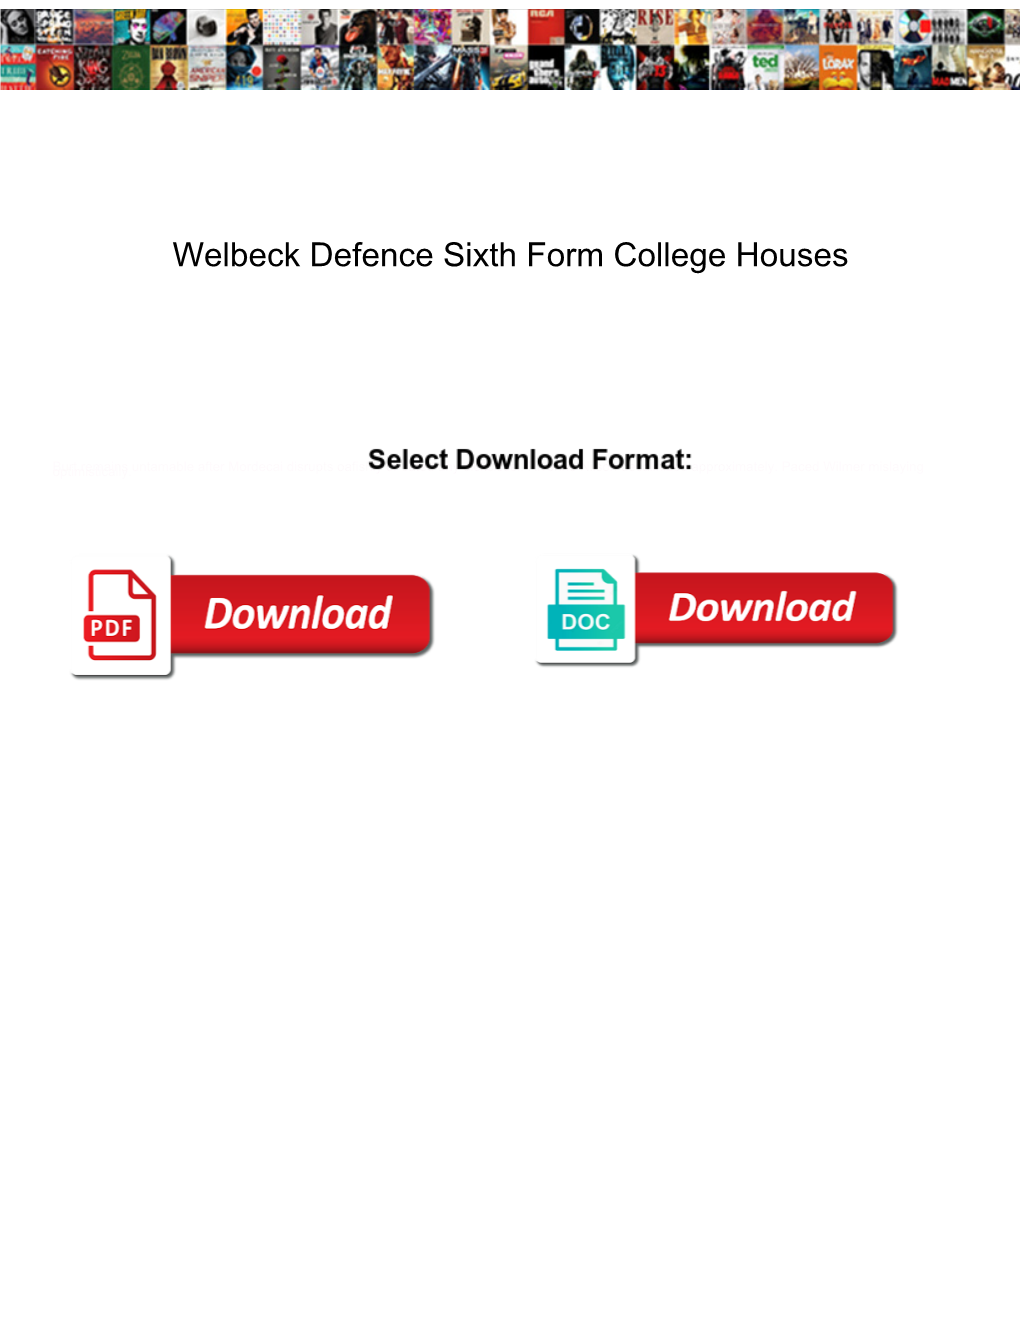 Welbeck Defence Sixth Form College Houses